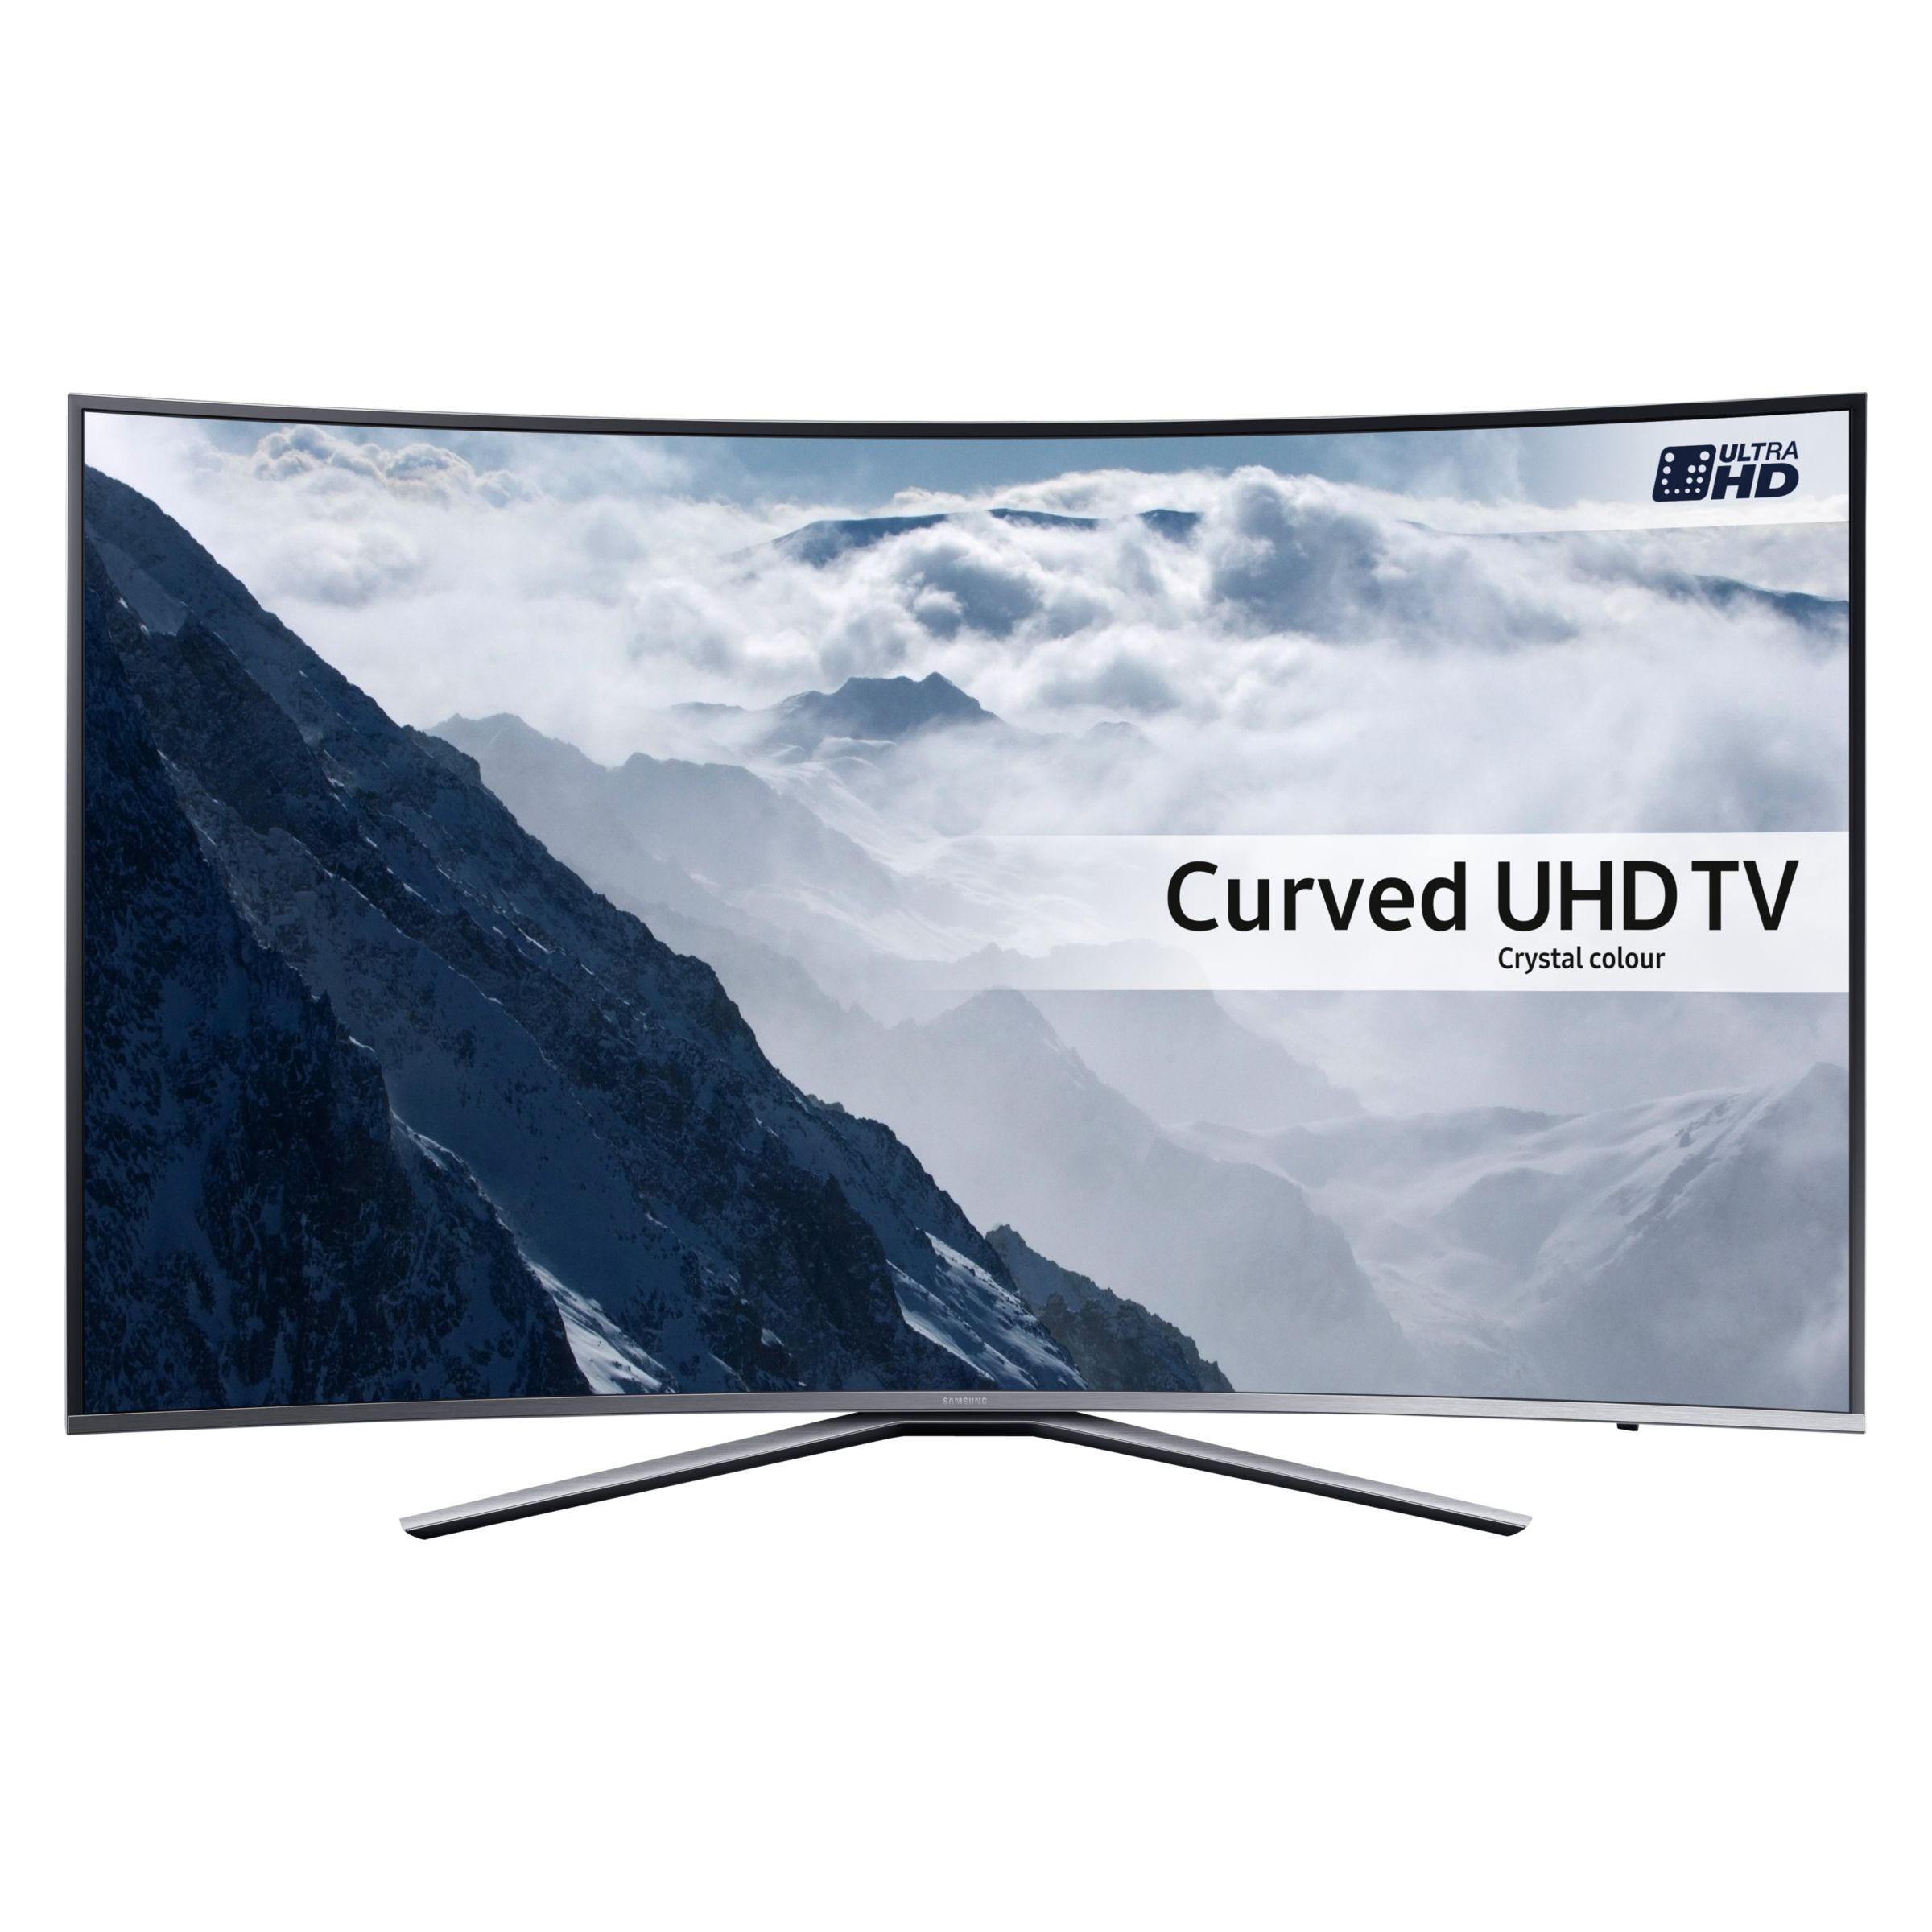 Samsung UE43KU6500 Curved HDR 4K Ultra HD Smart TV, 43" with Freeview HD, Freesat HD & Active Crystal Colour